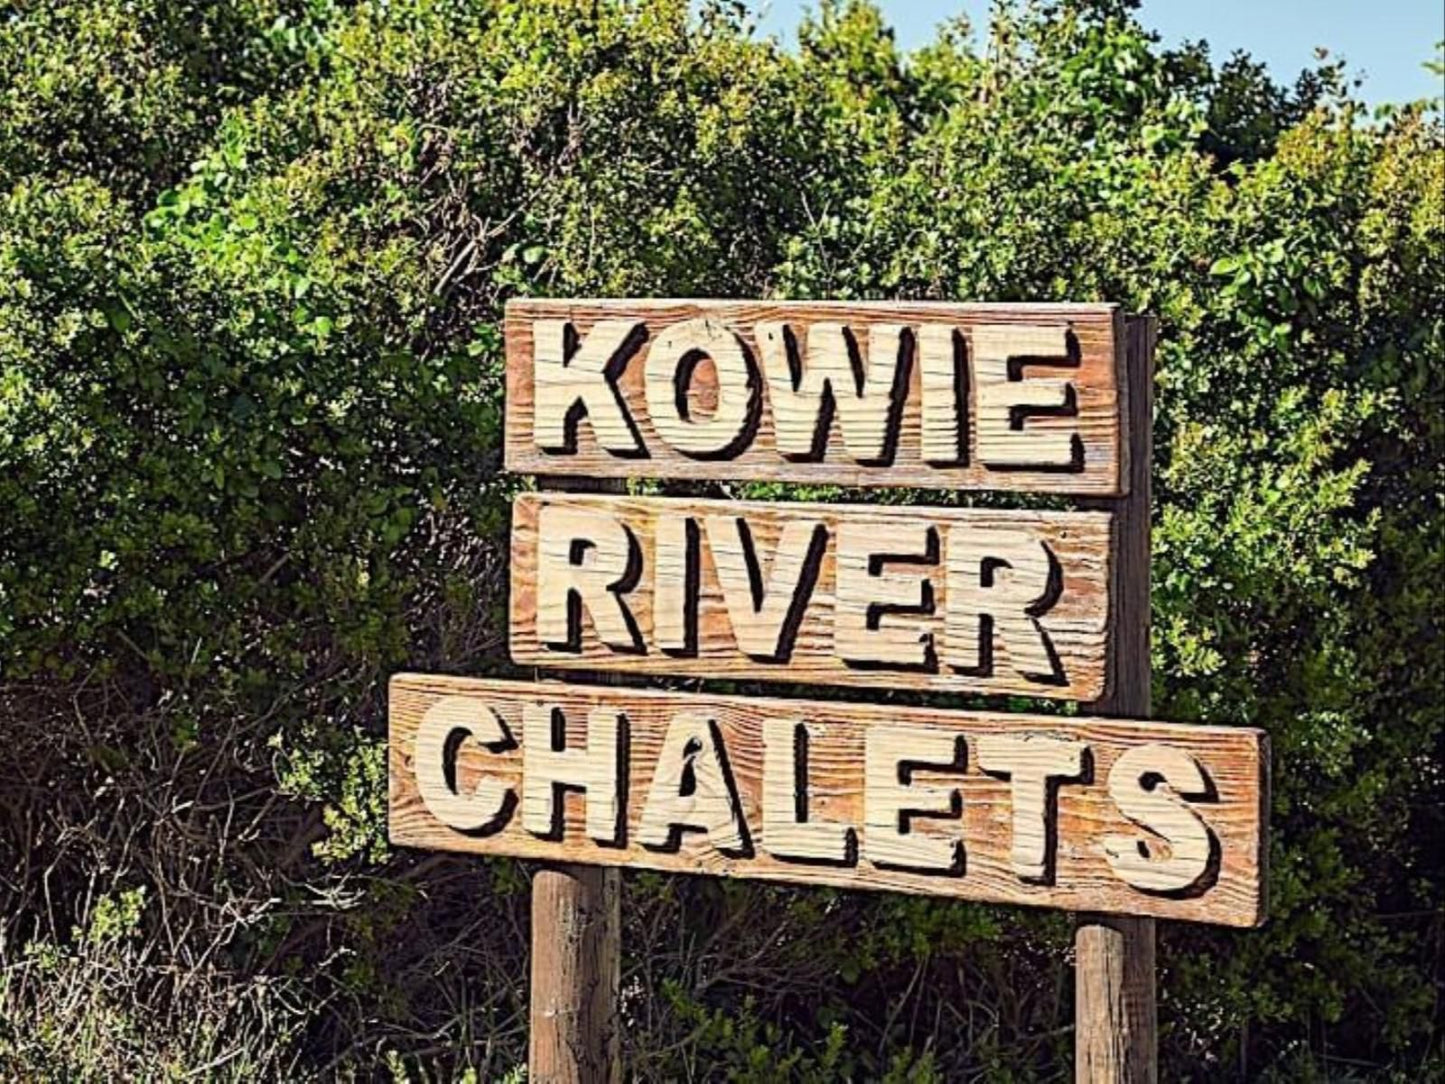 First Group Kowie River Chalets Port Alfred Eastern Cape South Africa Sign, Text